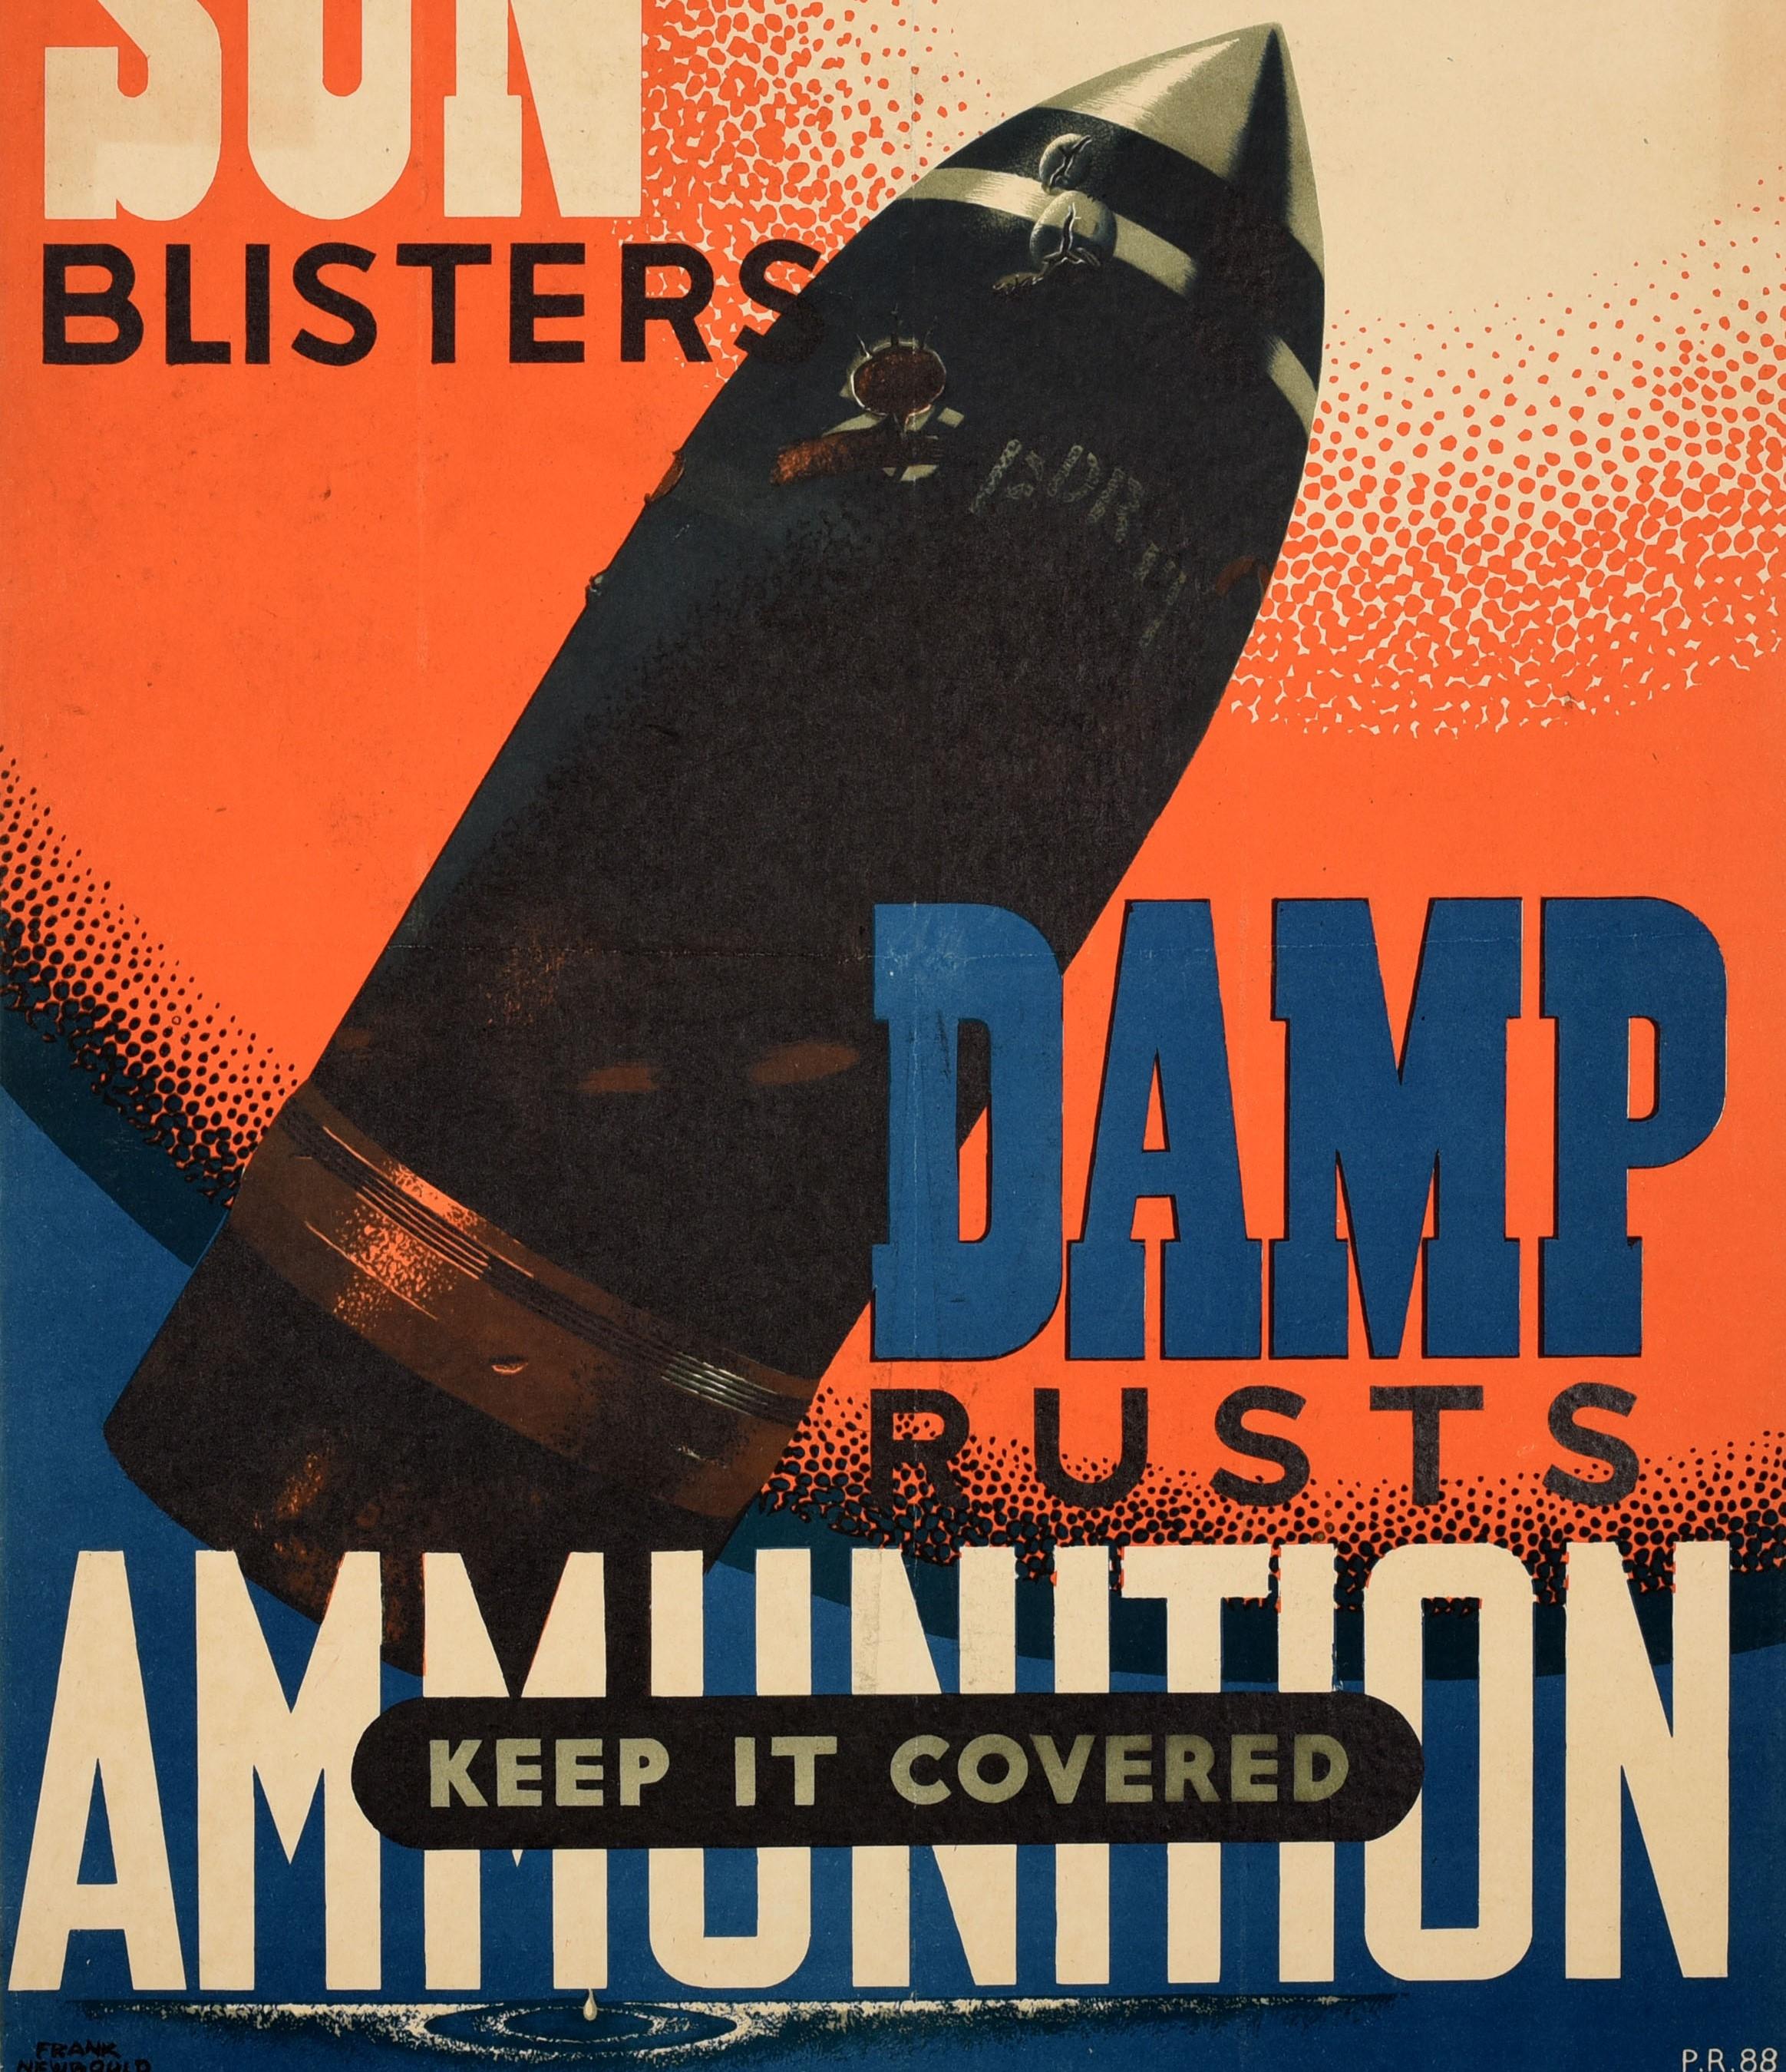 British Original Vintage War Poster Sun Blisters Damp Rusts Ammunition Cover WWII Safety For Sale